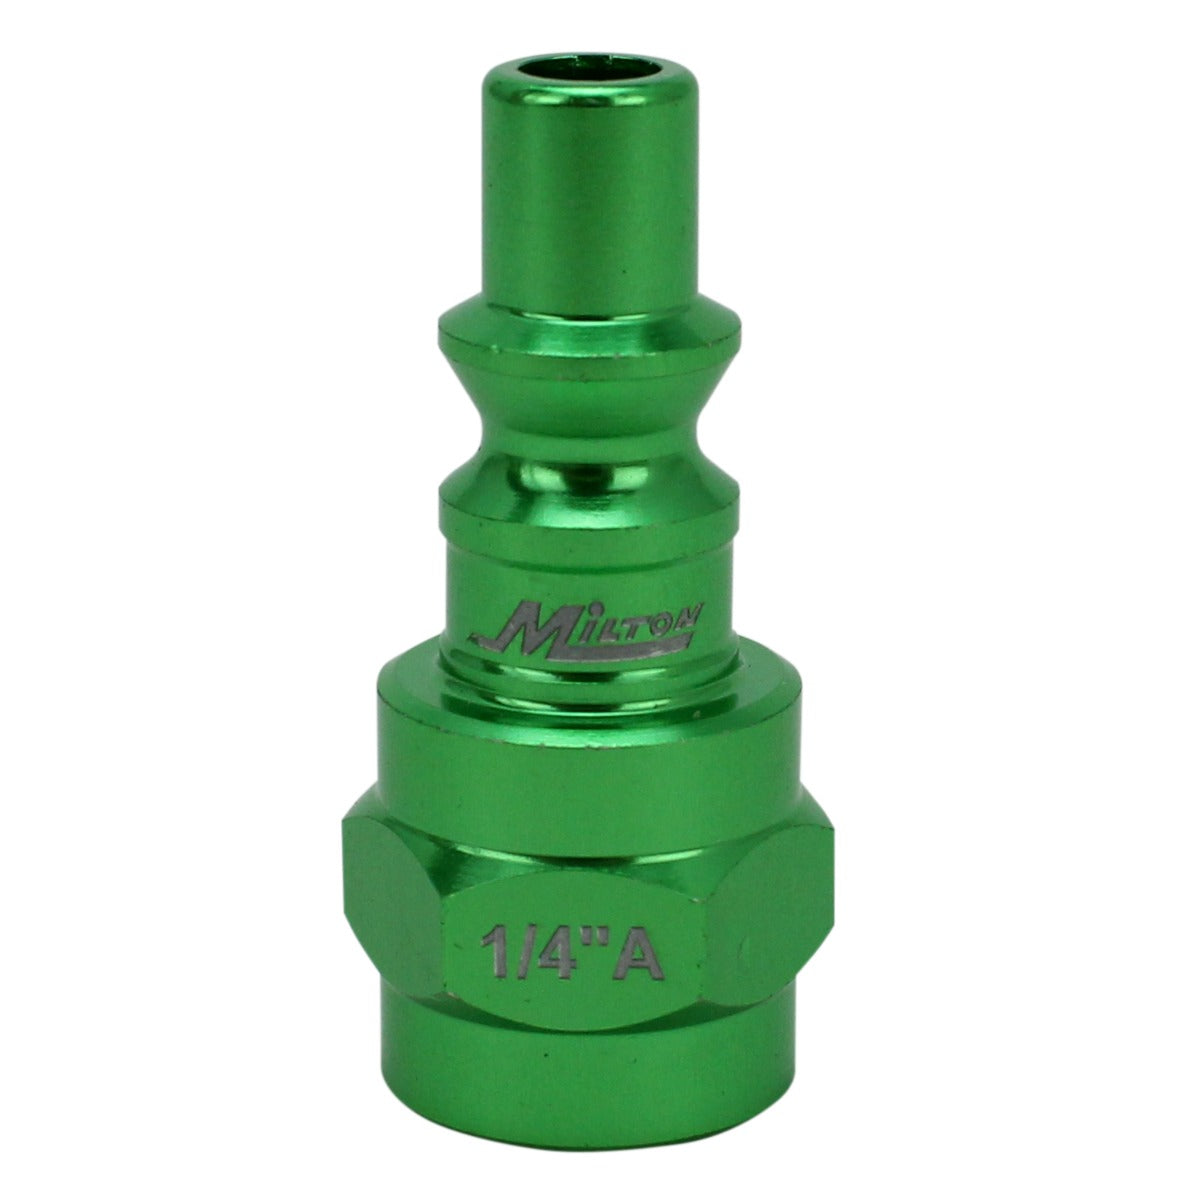 COLORFIT® Plugs (A-Style, Green) - 1/4